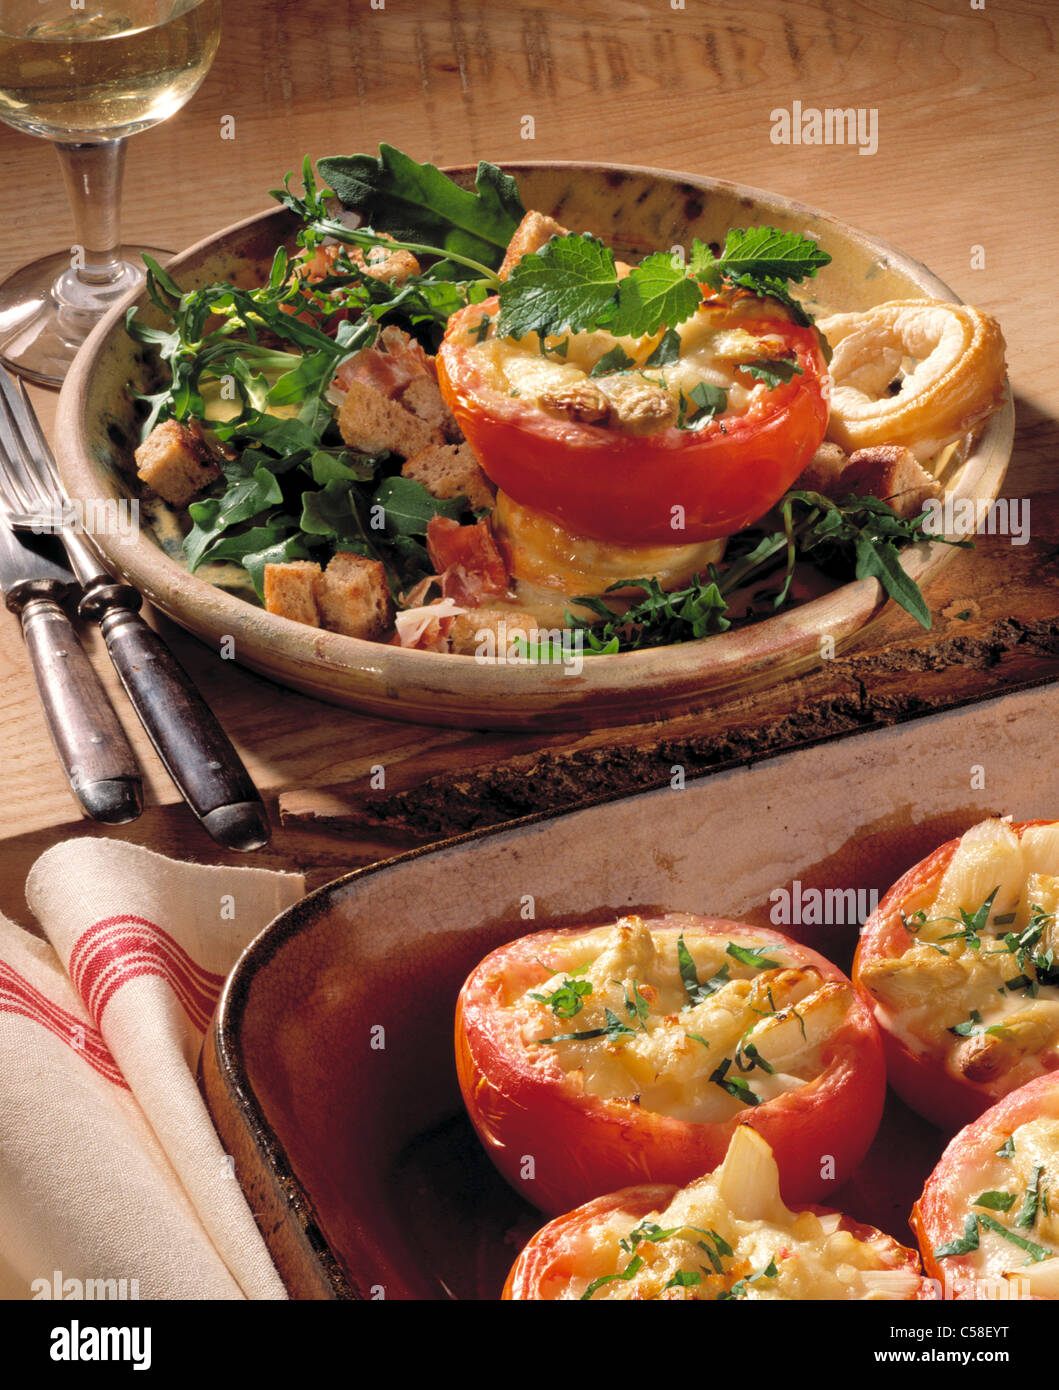 Tomatoes filled with asparagus and rucola salad on the side Stock Photo